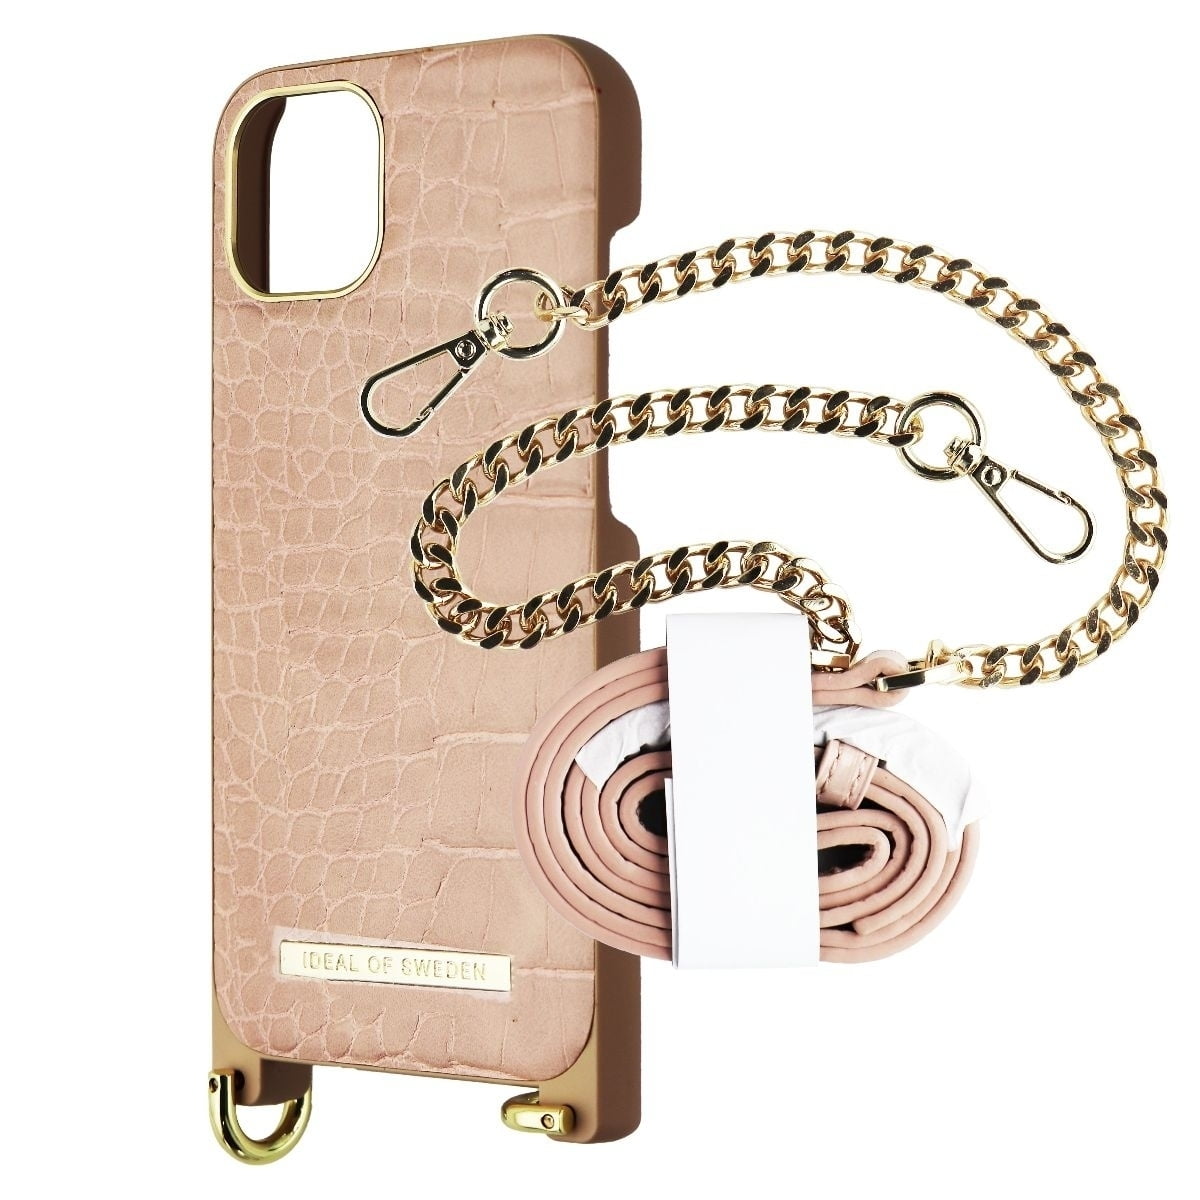 Wholesale Eco-friendly Compostable iPhone Cases with Necklace Lanyard